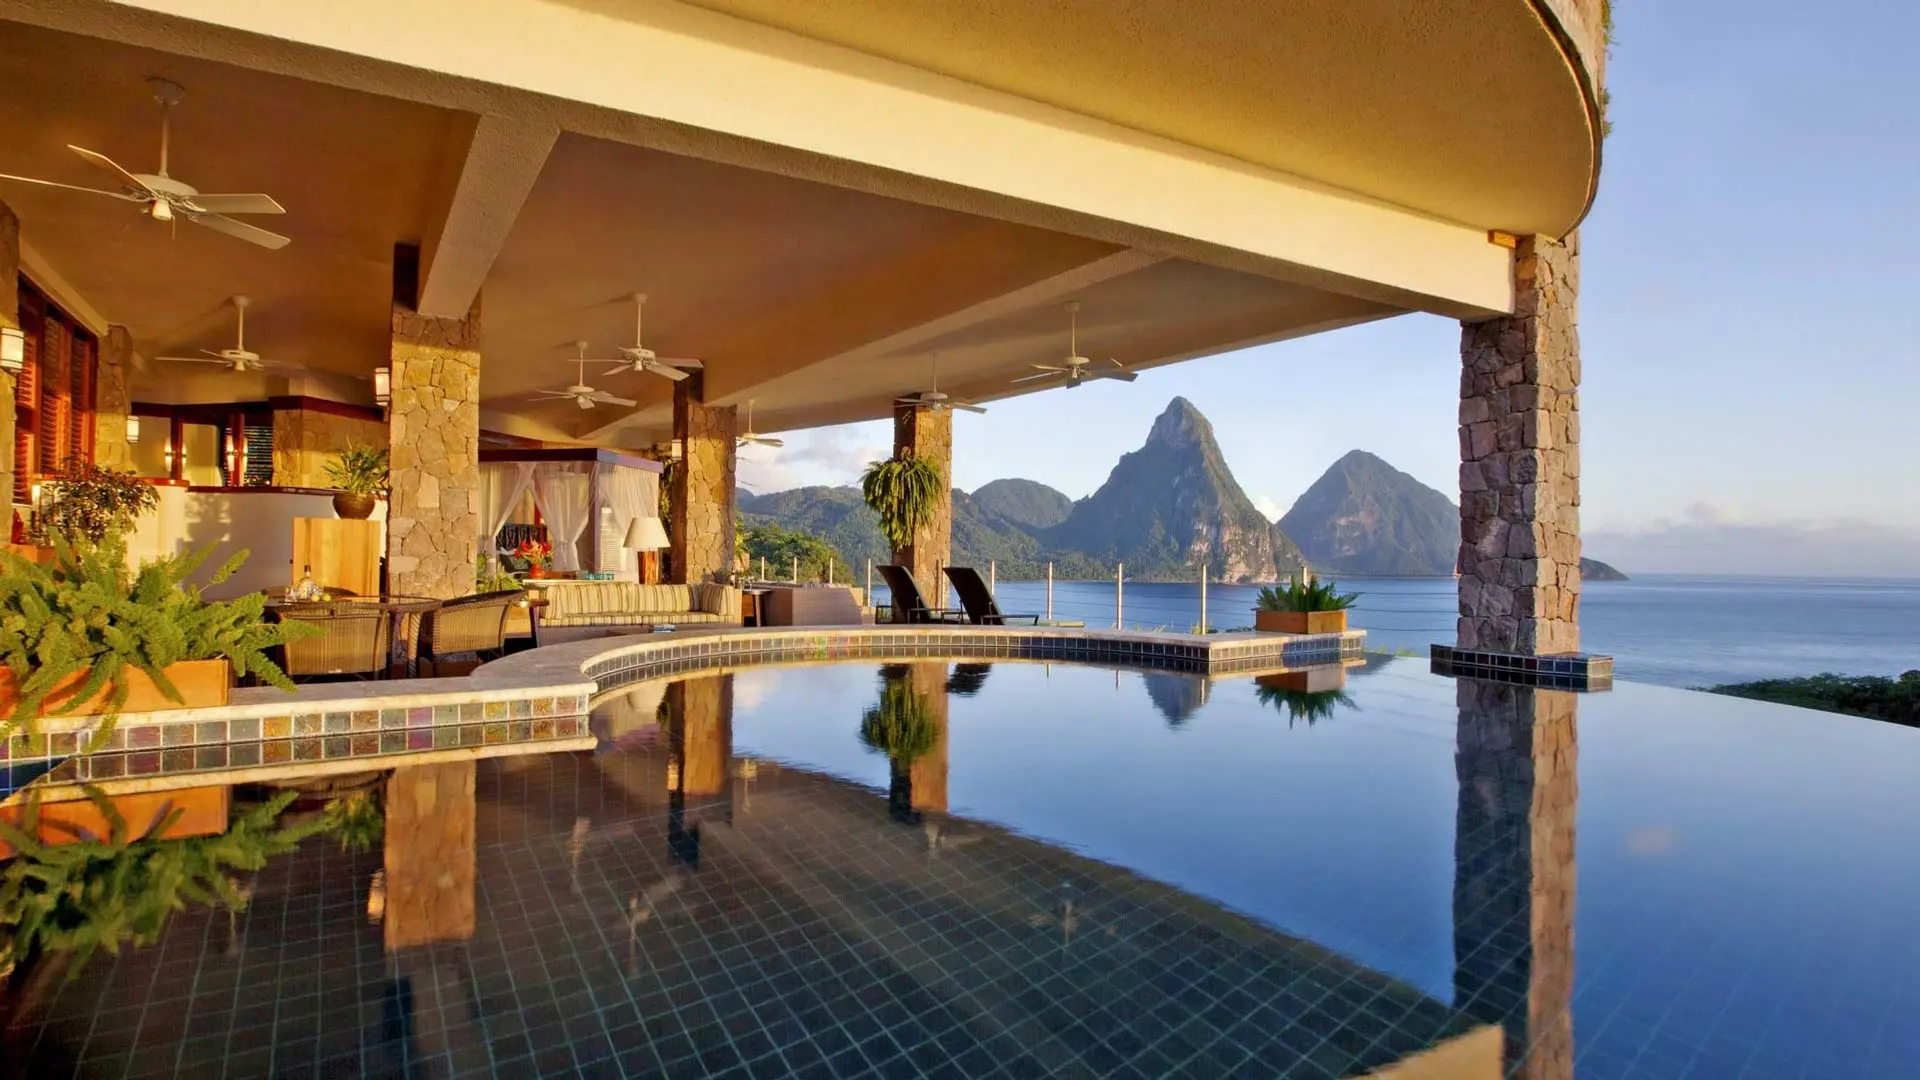 Hotel review Service & Facilities' - Jade Mountain - 4